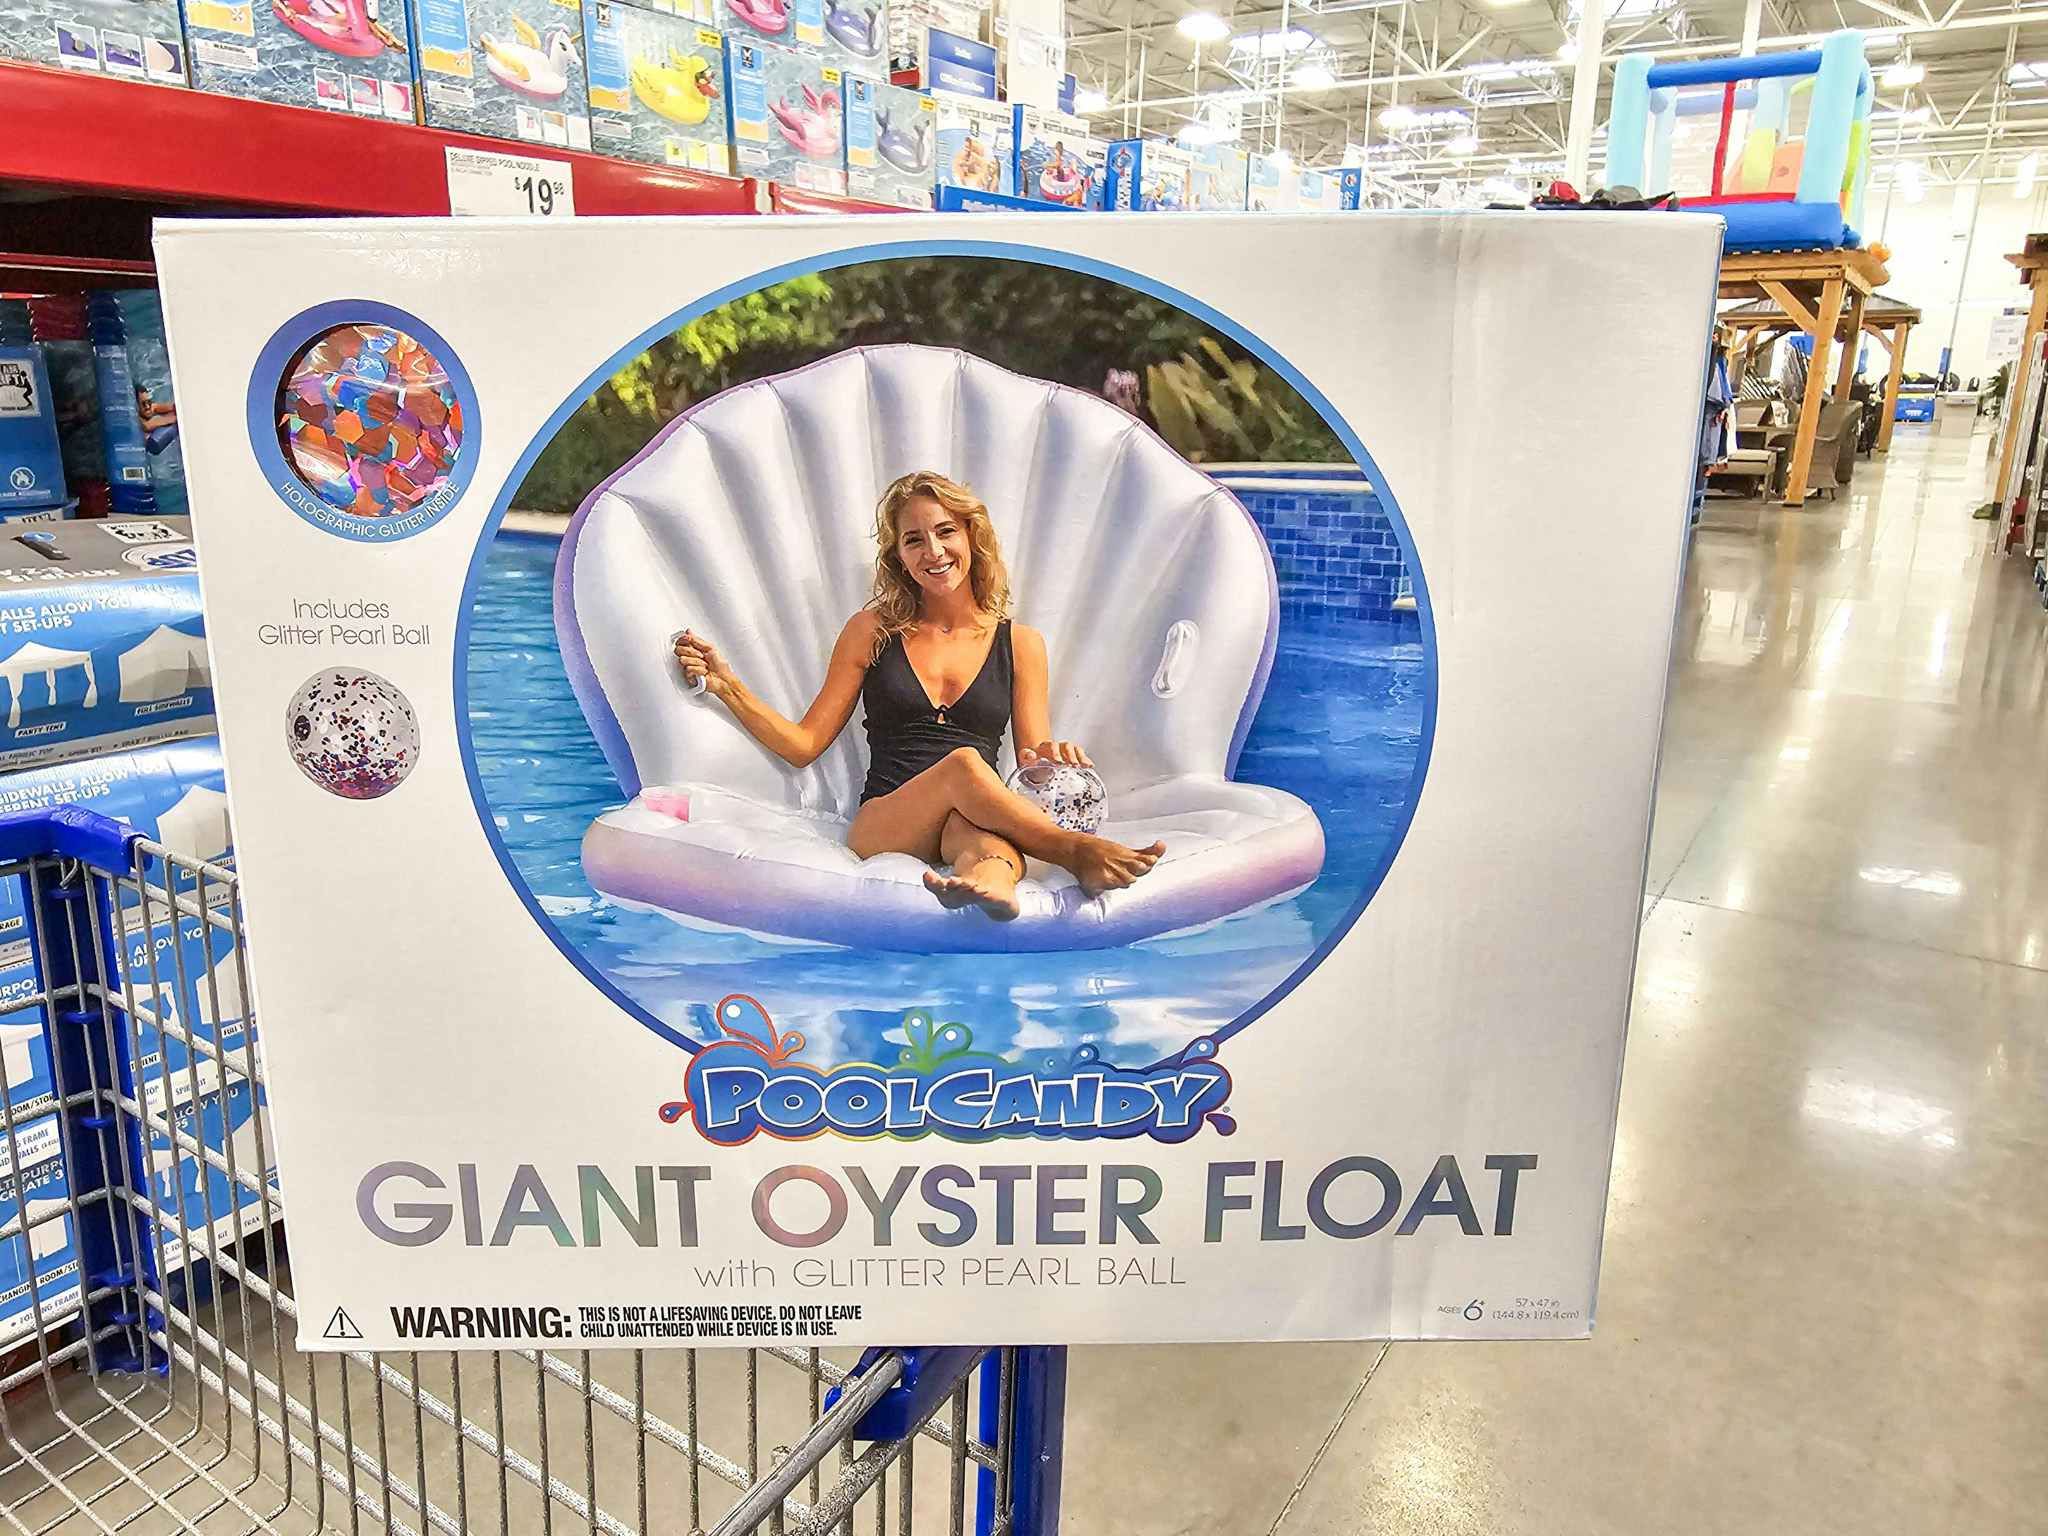 giant oyster pool float on the edge of a cart in an aisle